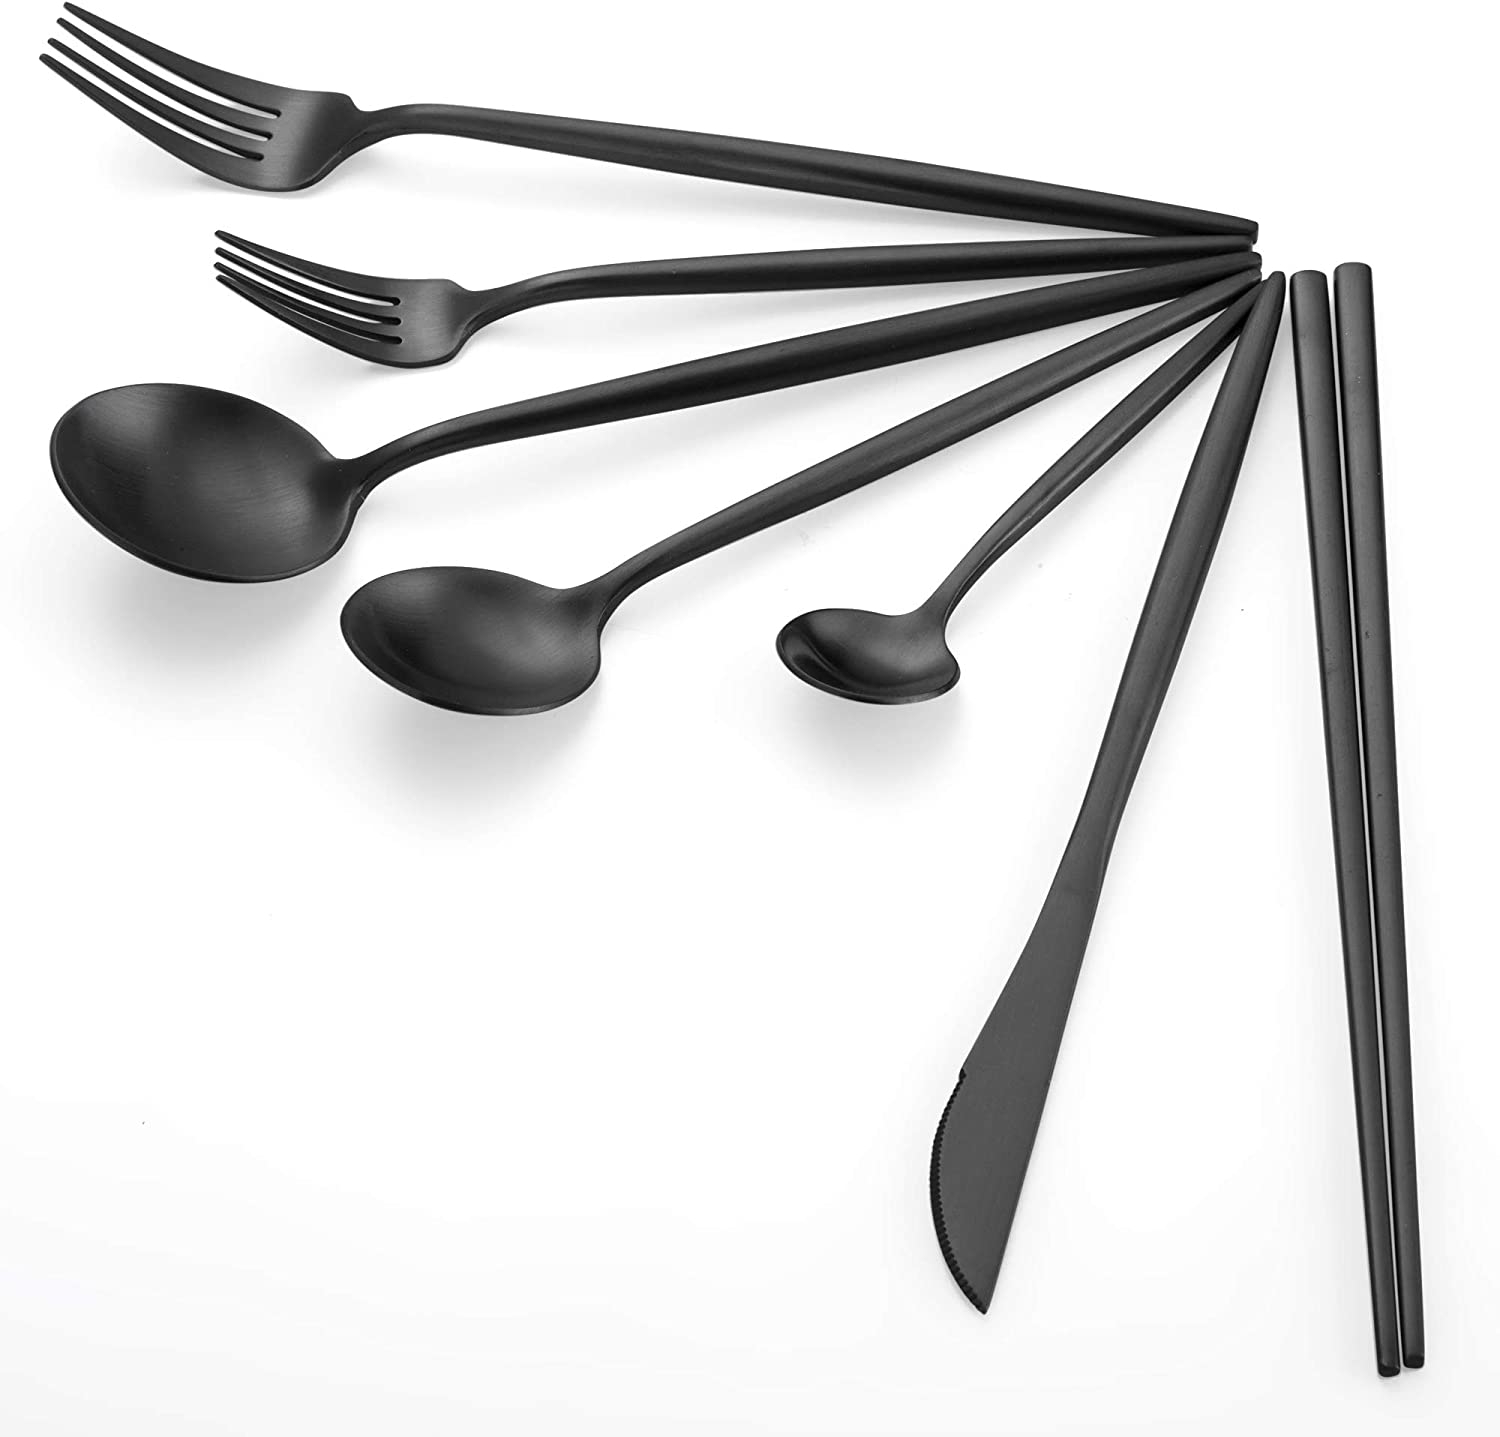 kitchen accessories home essentials for new apartment eating tenedores japanese bronze dinnerware set modern silverware set stainless steel modern set brass utensil small apartment gifts Japanese gift set kitchen utinsils gift set Christmas gift thanksgiving xmas birthday anniversary party hosting at home cylinder box mums gifts goa bronze flatware juego de cuchillos para cocina dishwasher safe amazon finds wedding registry wish list wishlist new home